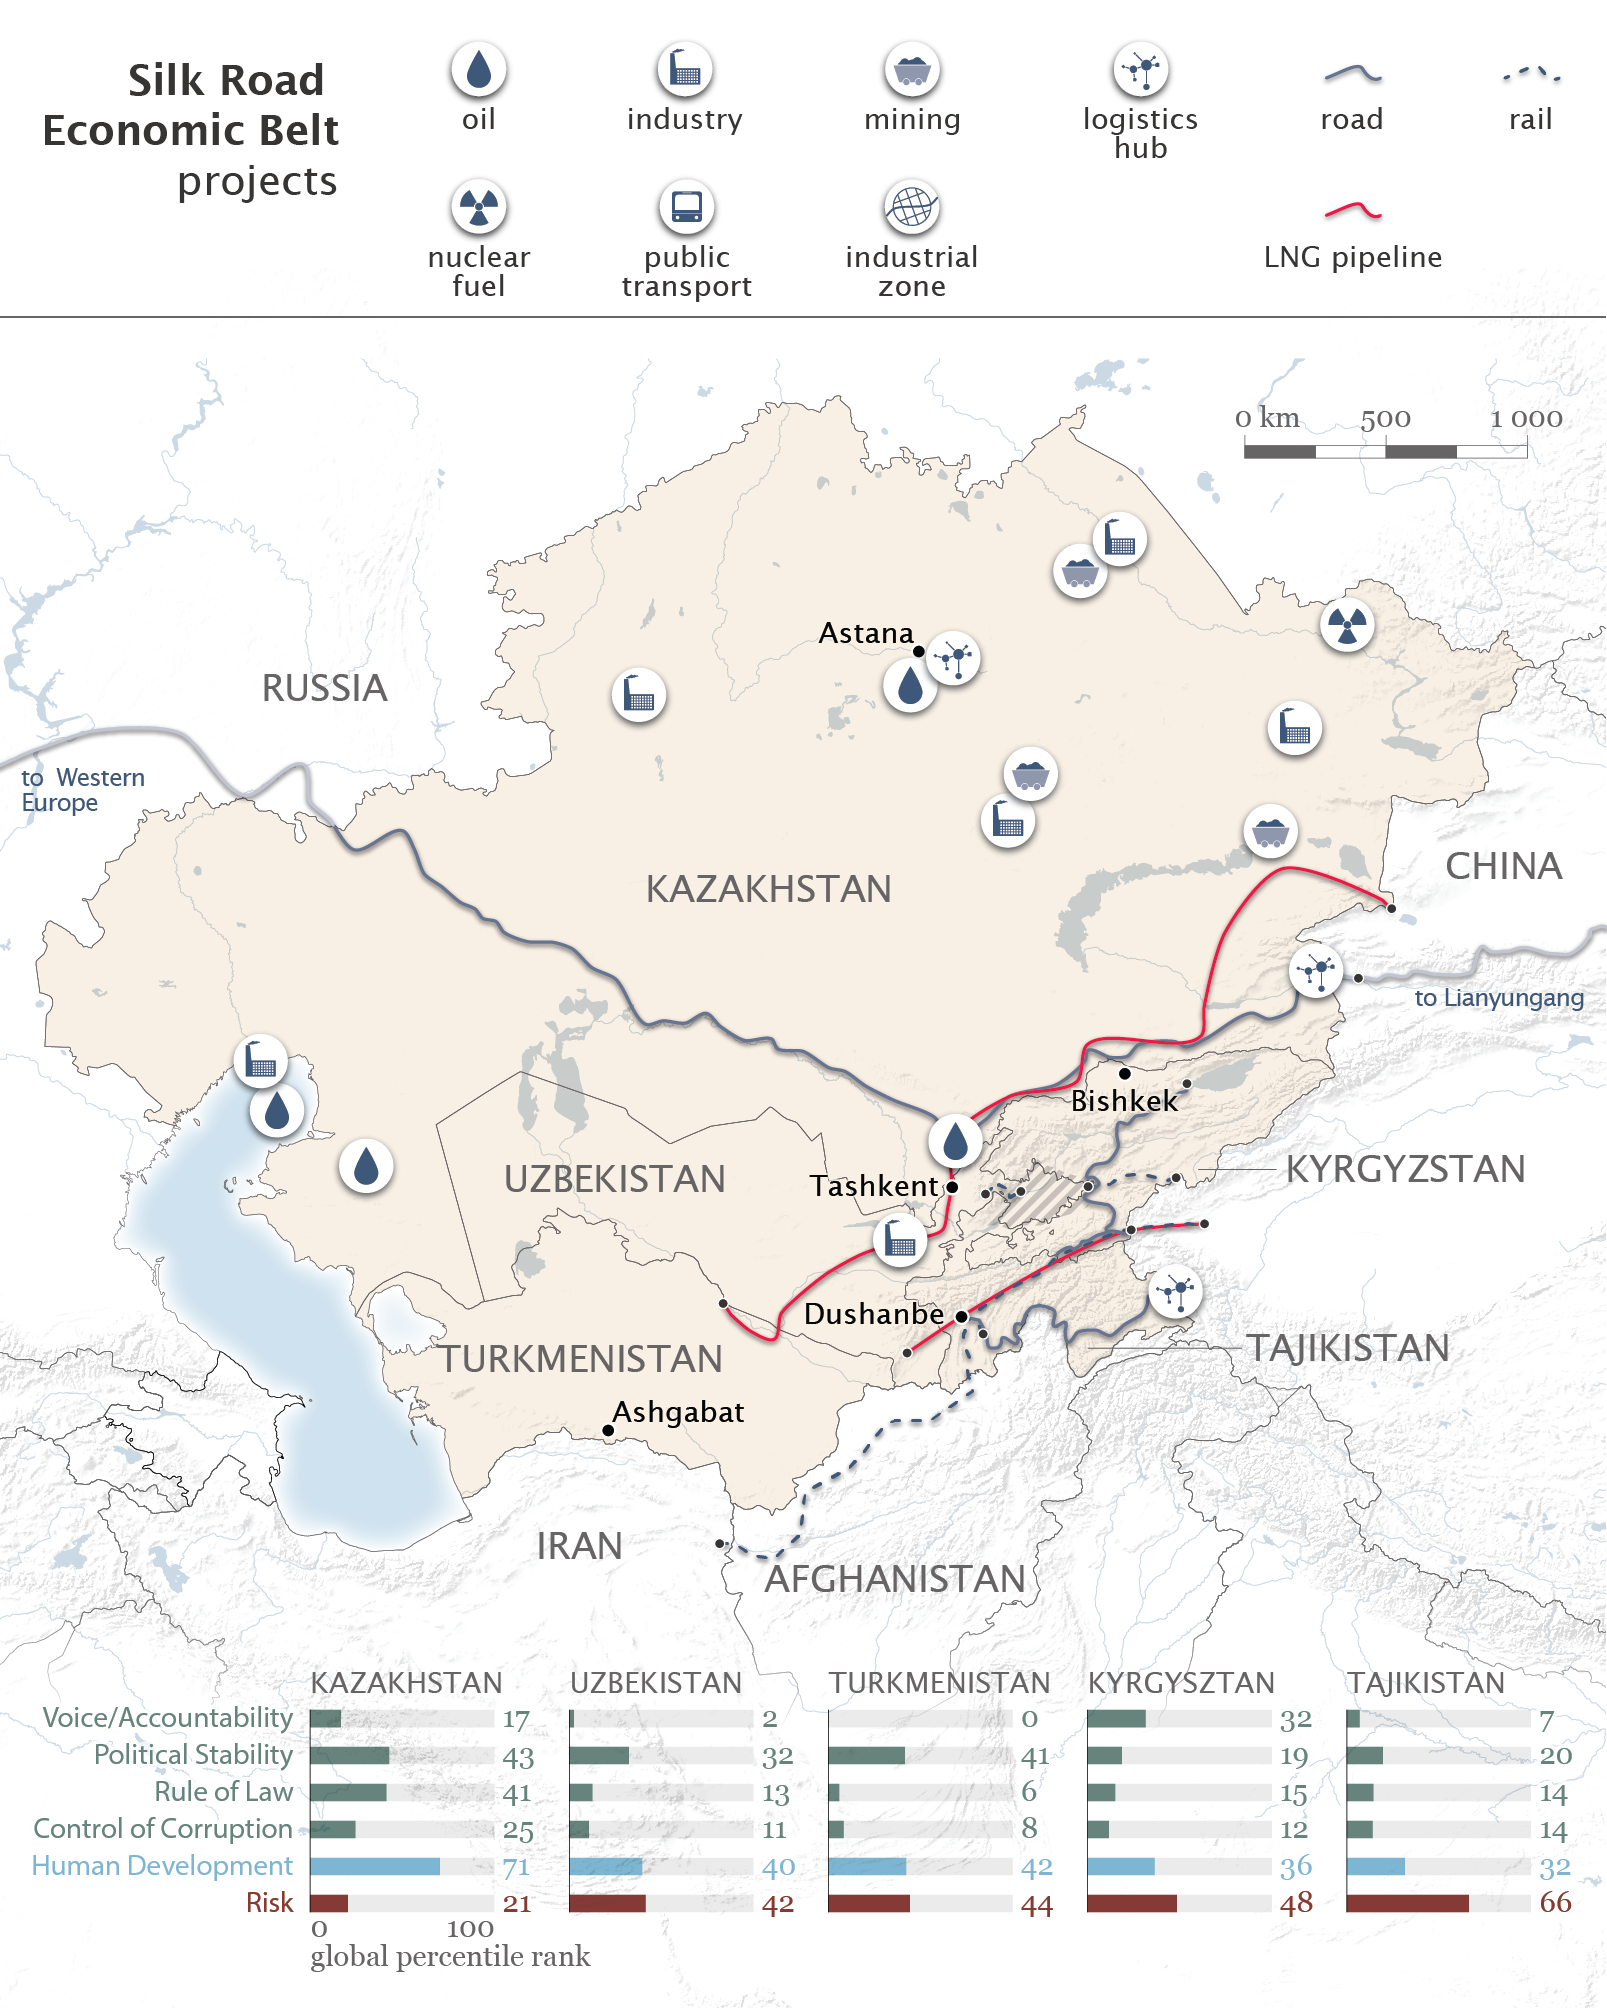 Map of Central Asia illustrating Silk Road Economic Belt projects